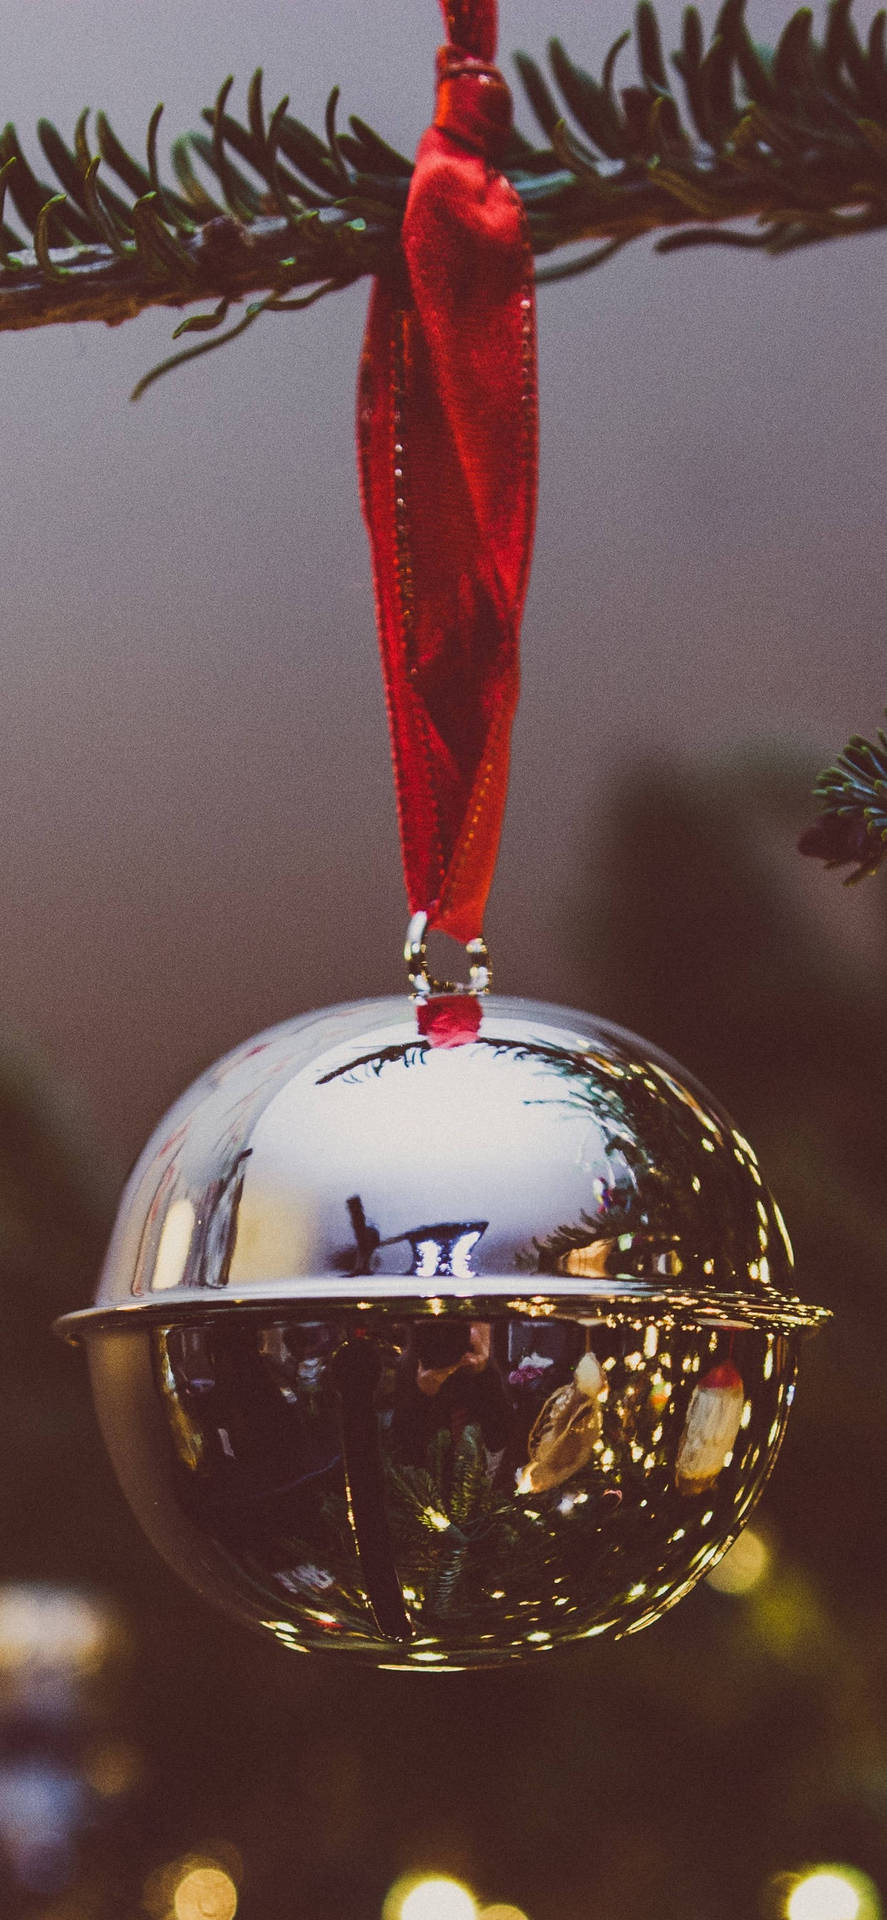 Aesthetic Christmas Silver Ball Iphone Background